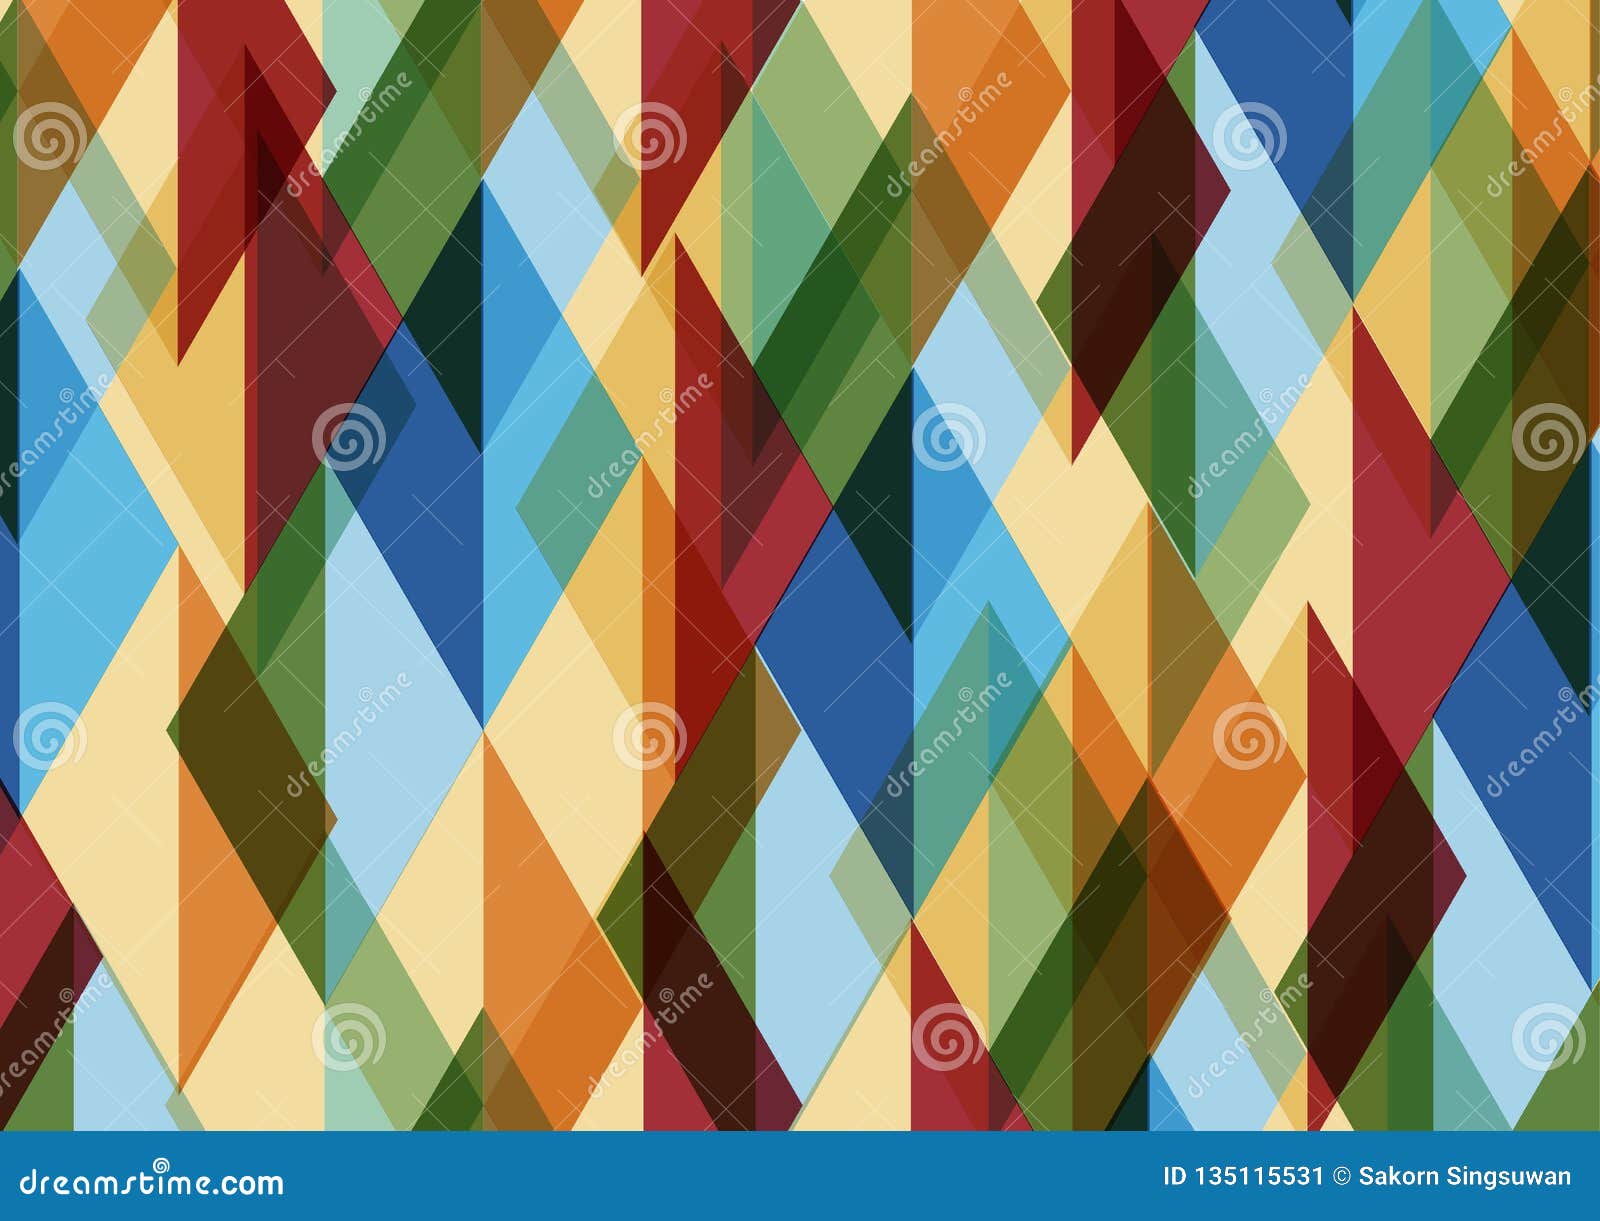 abstract geometric mosaic pattern with triangles.   